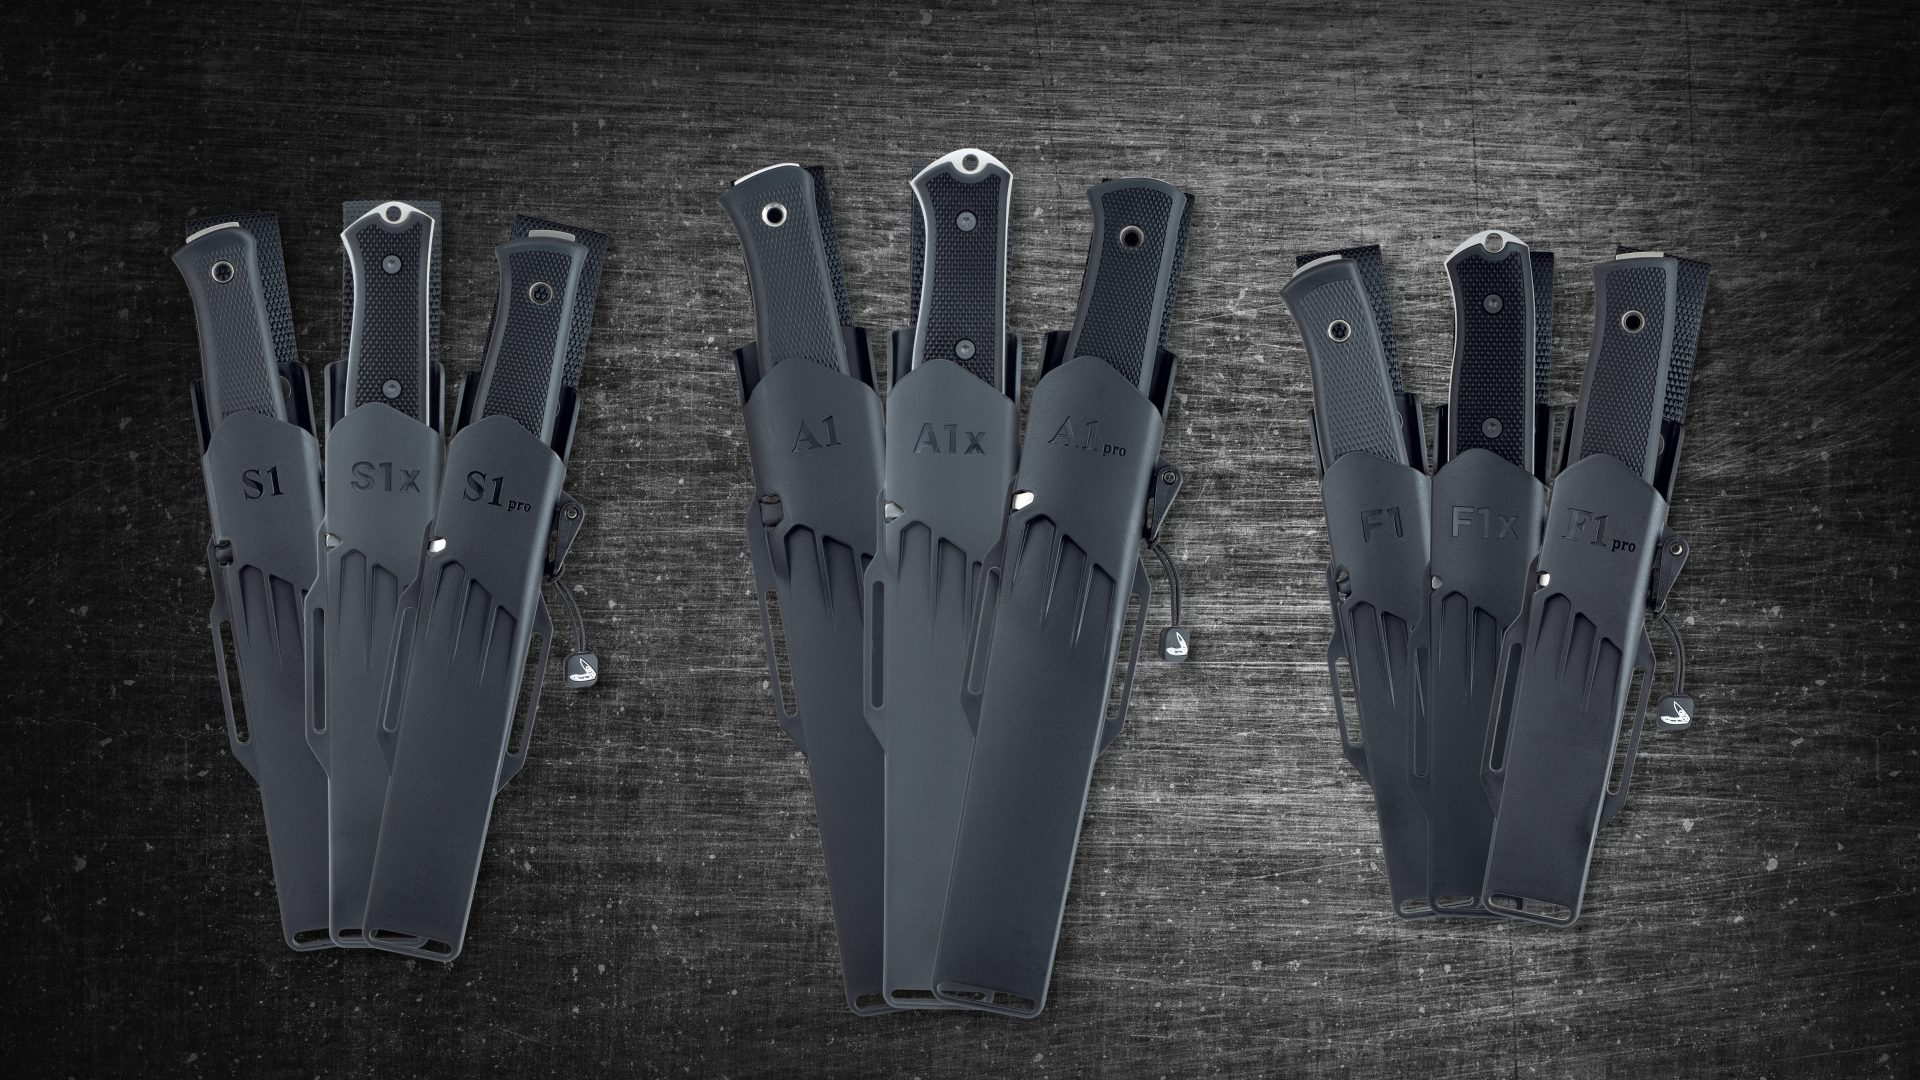 New Zytel sheaths for all F1, S1 & A1 knives!